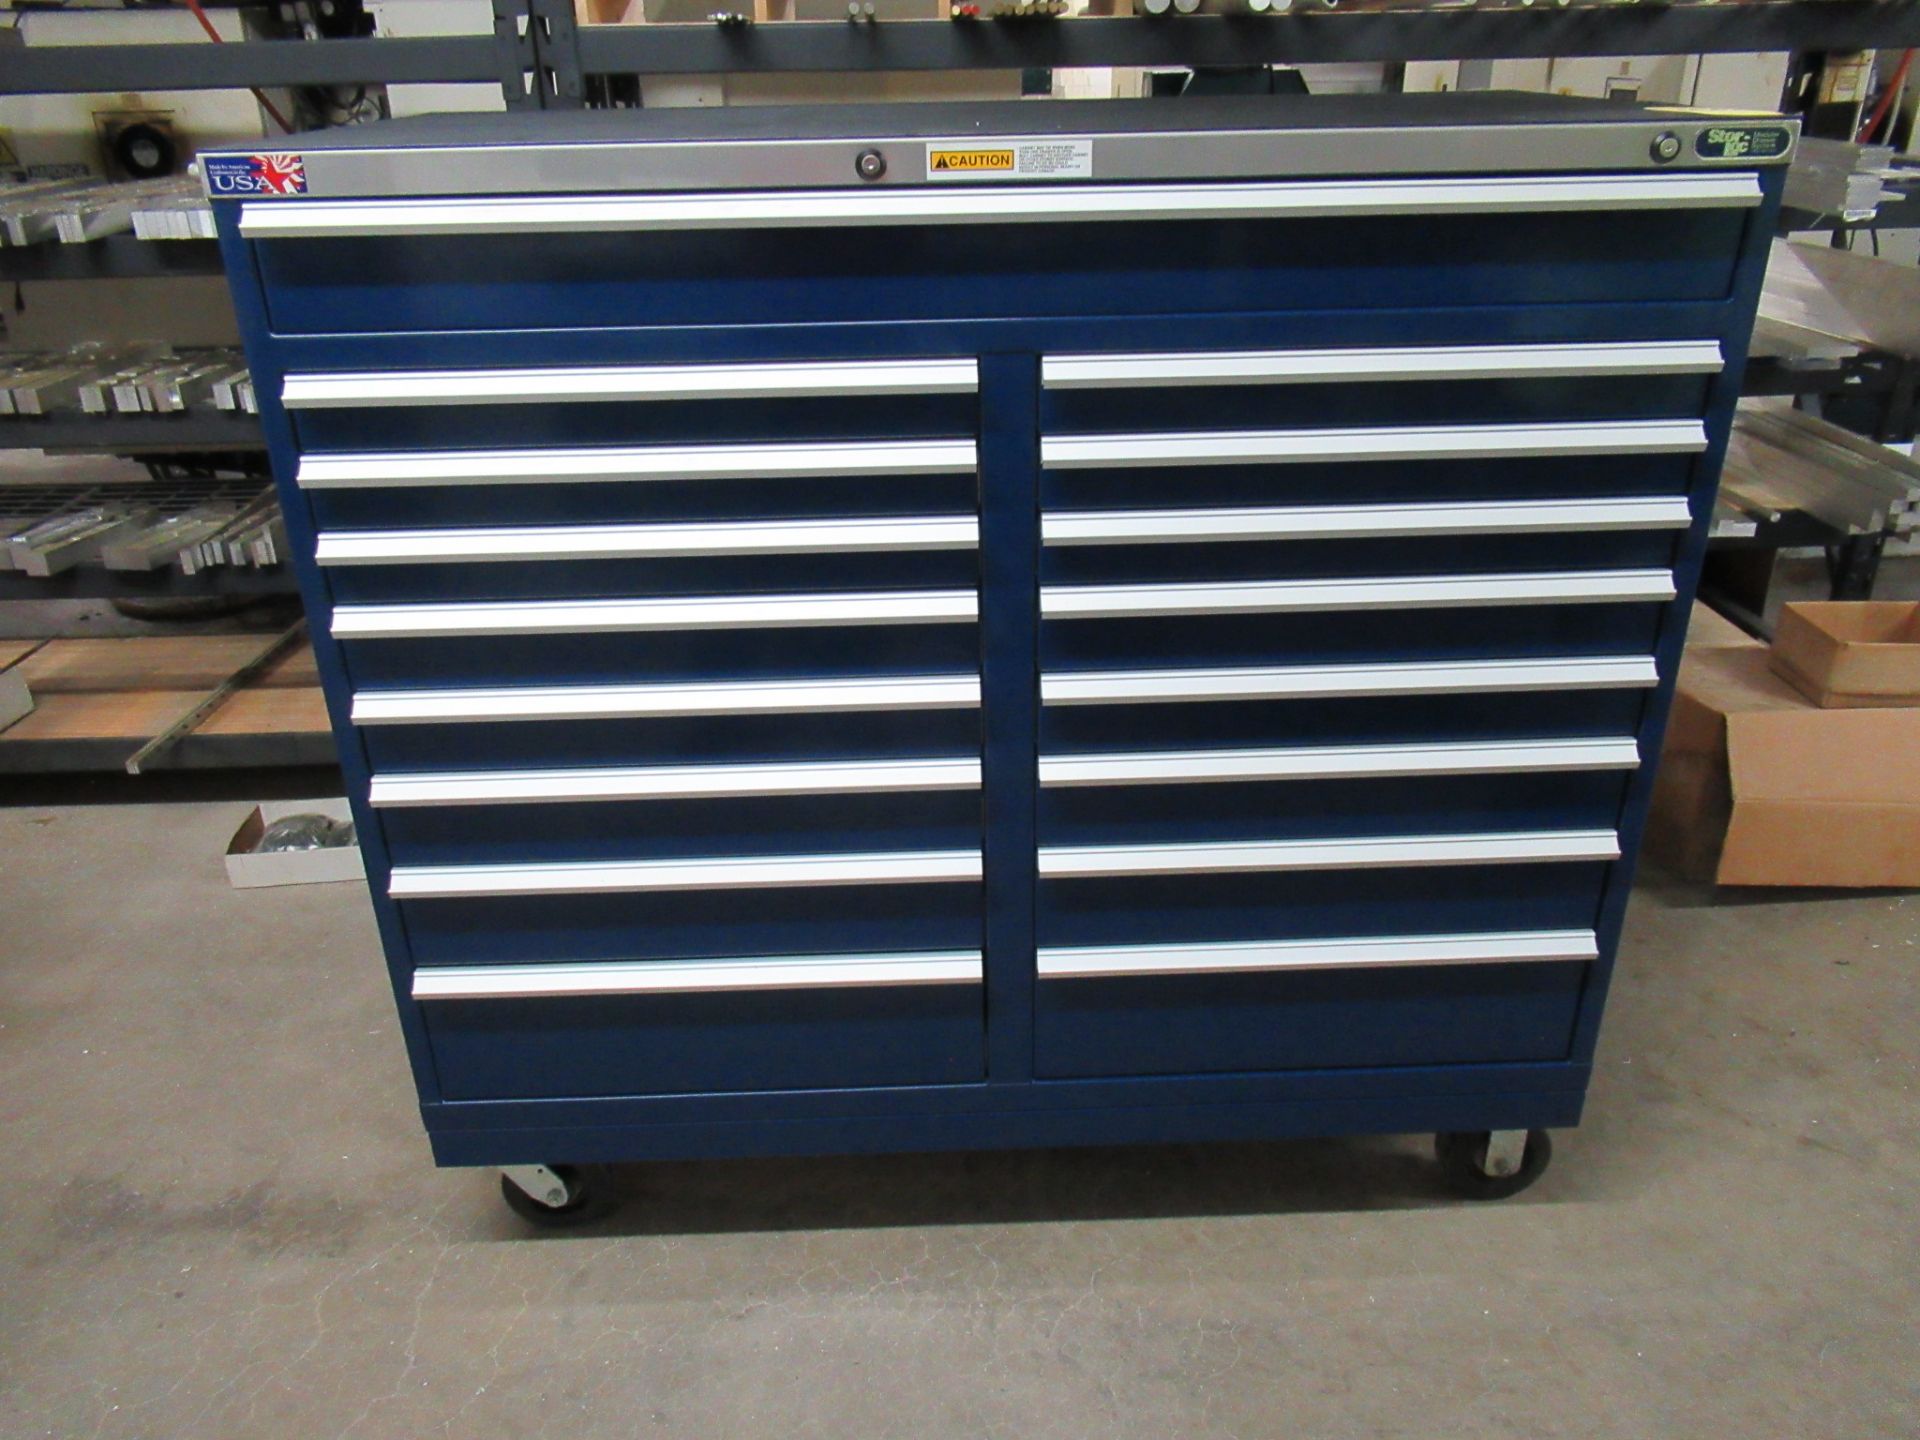 Stor-Loc 17 Drawer Upright Tool Chest, 58 1/2" Wide X 27 1/2" Deep X 55" Tall, on Casters, Like New